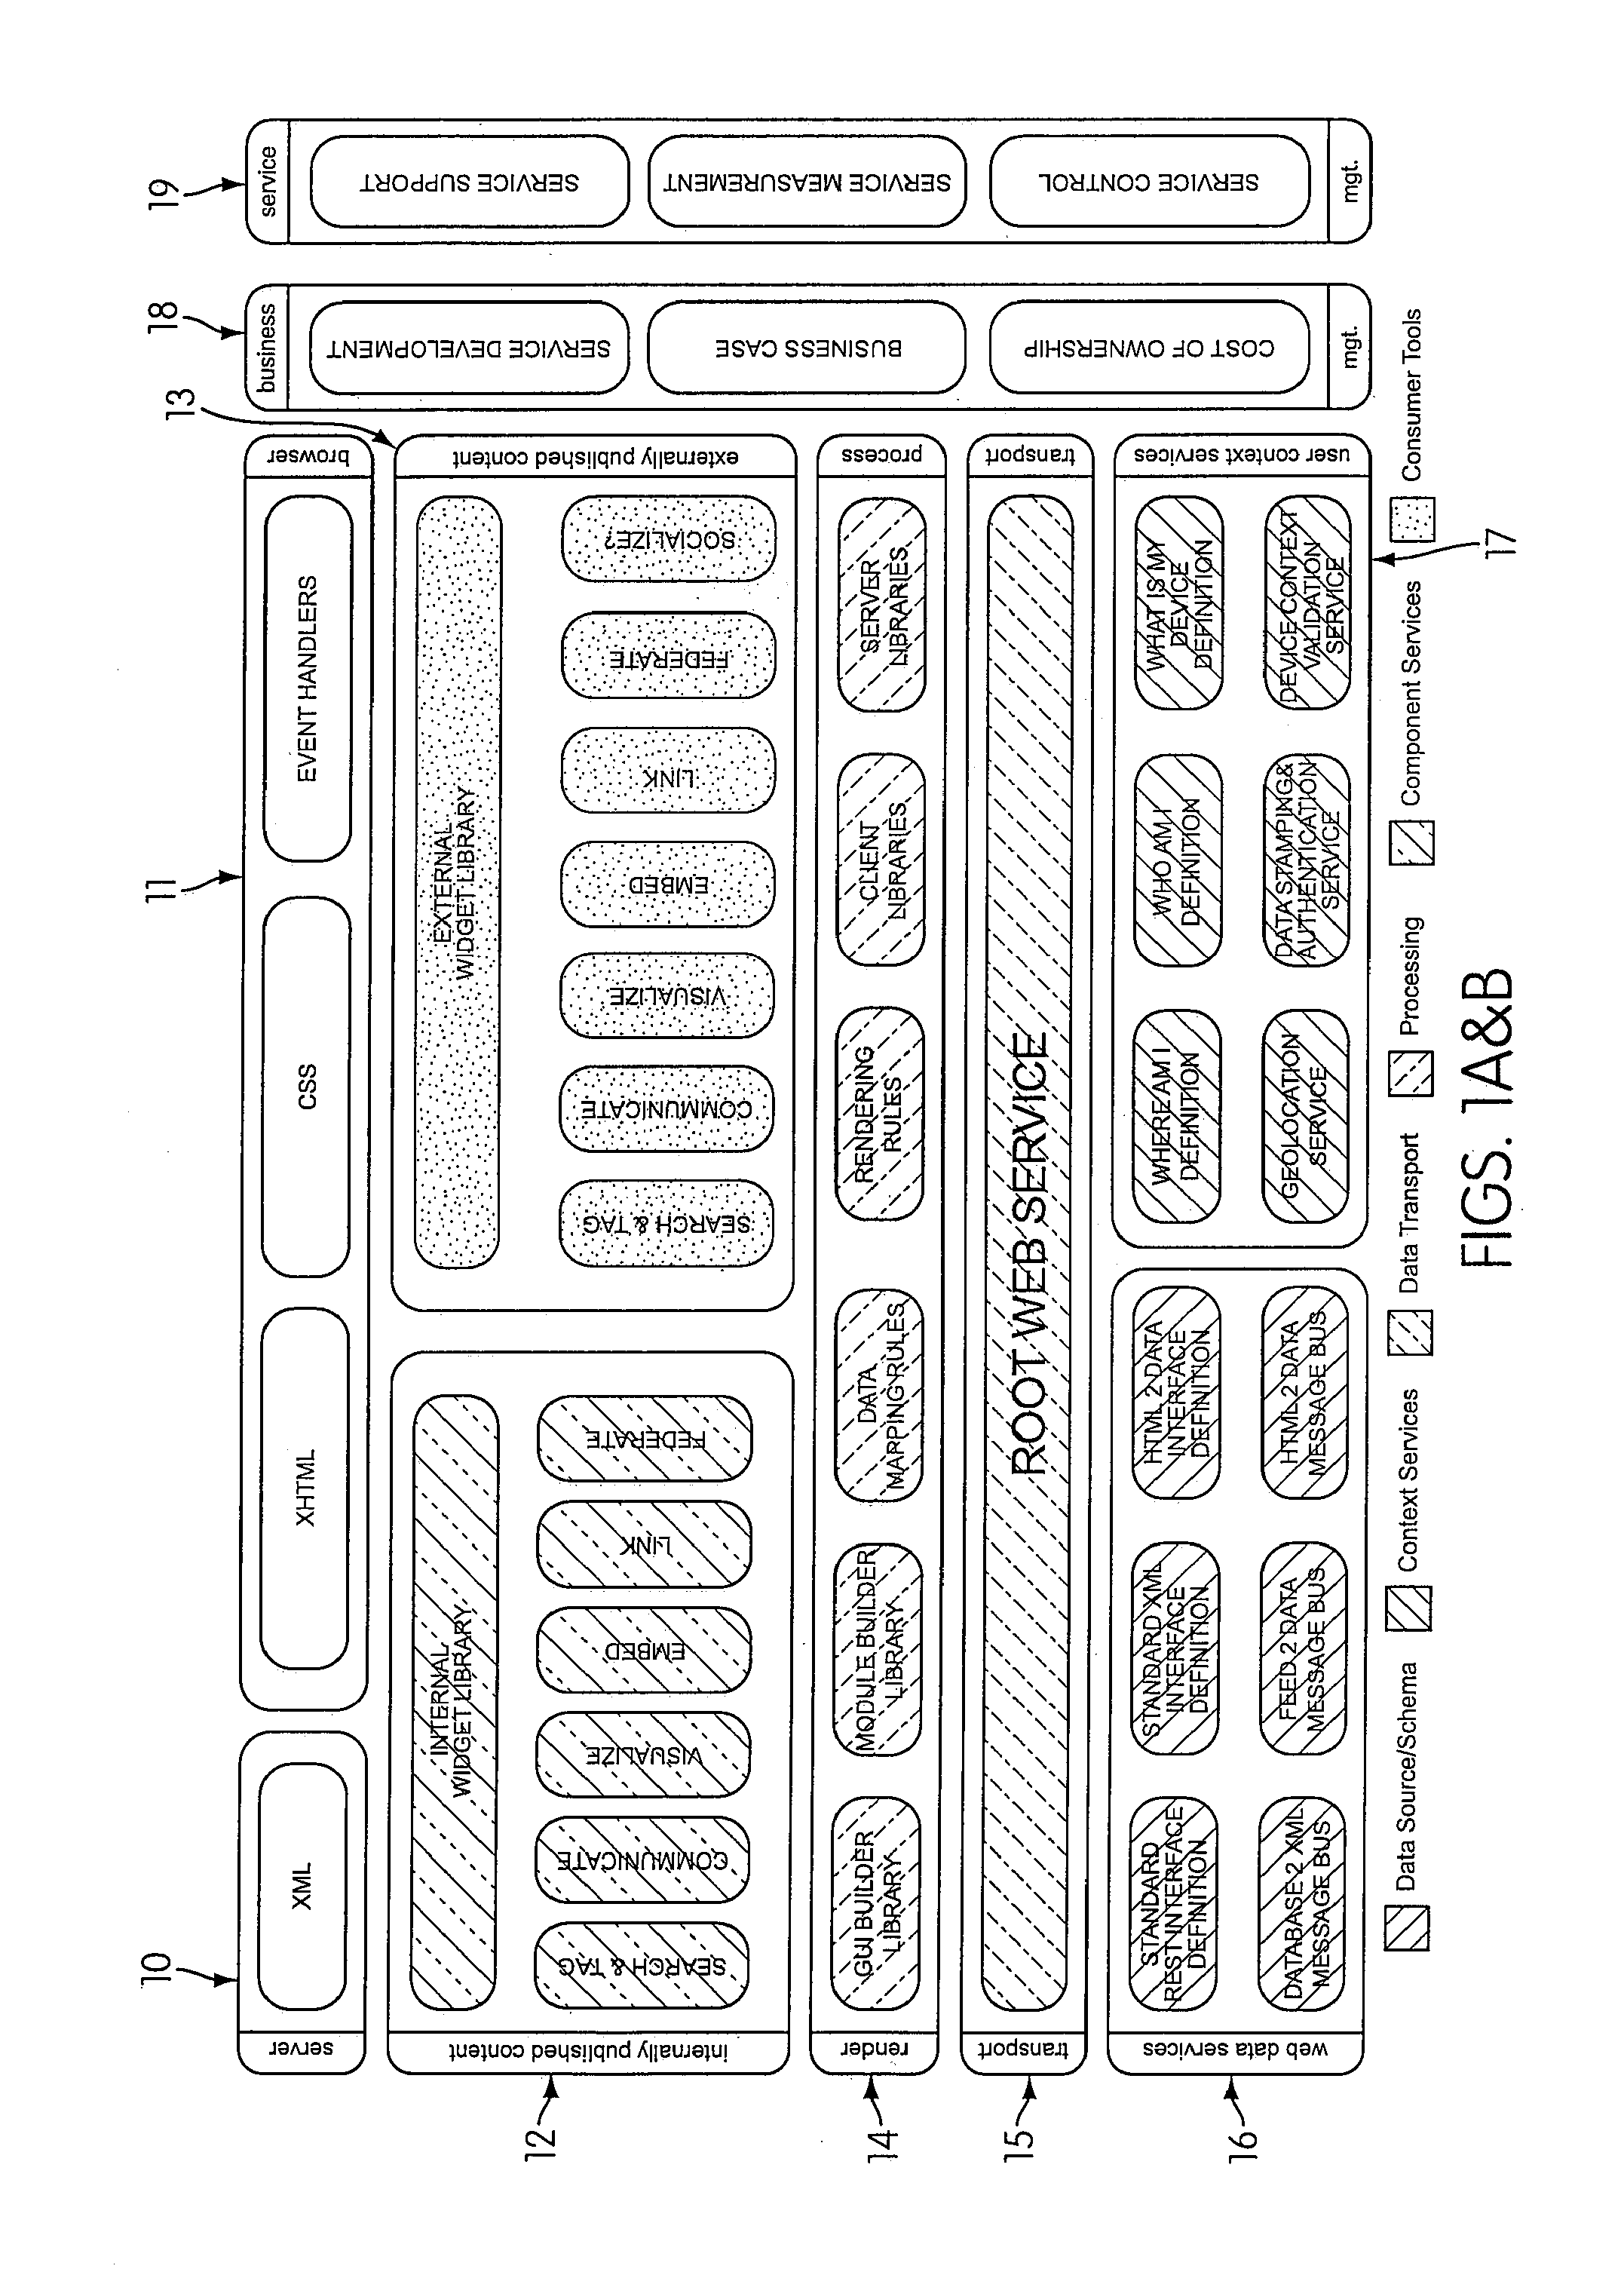 Enterprise Architecture System and Method